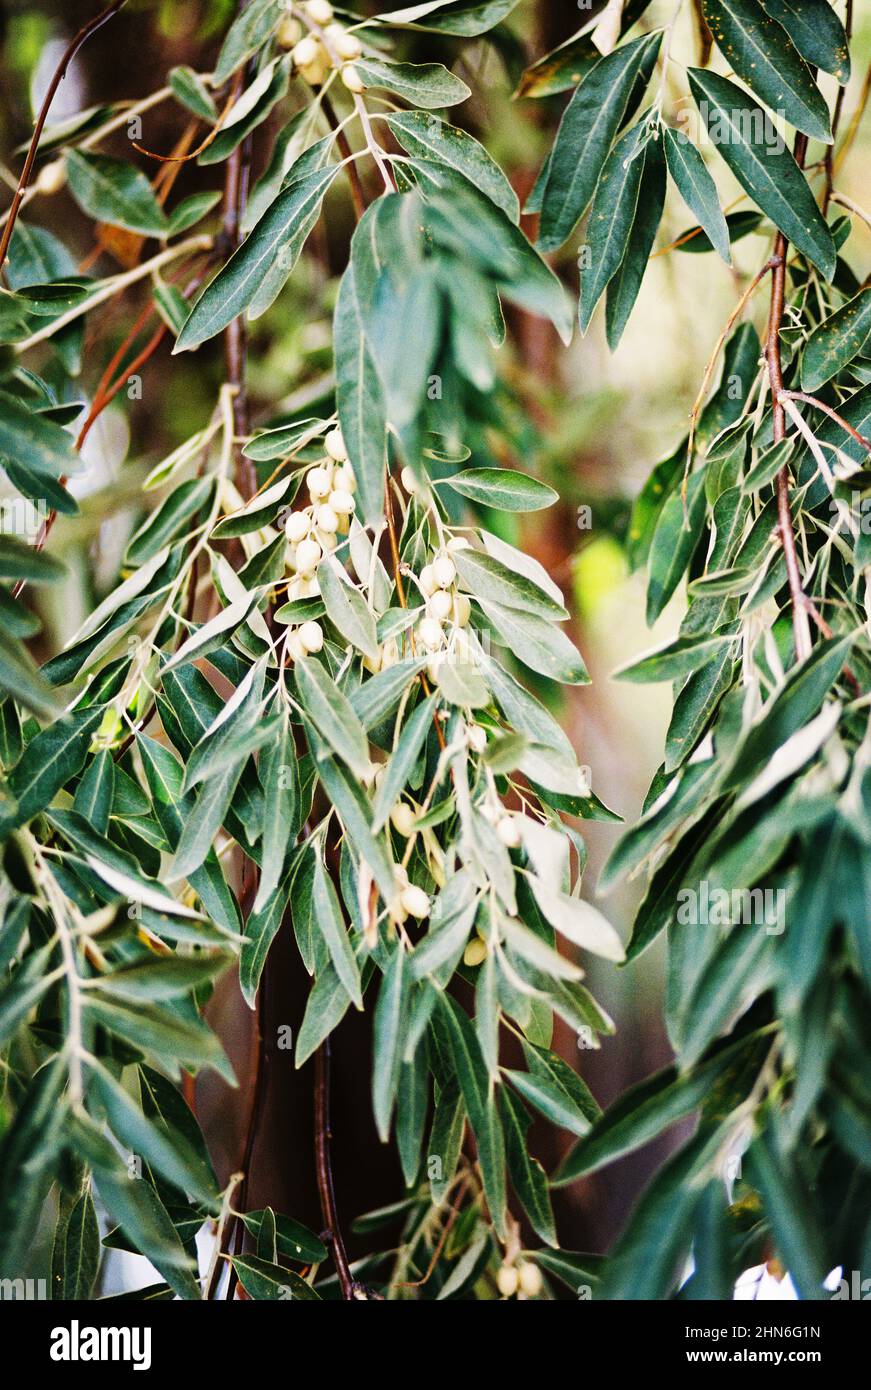 Russian Olive Branch Close Up with Silver Berries Stock Photo